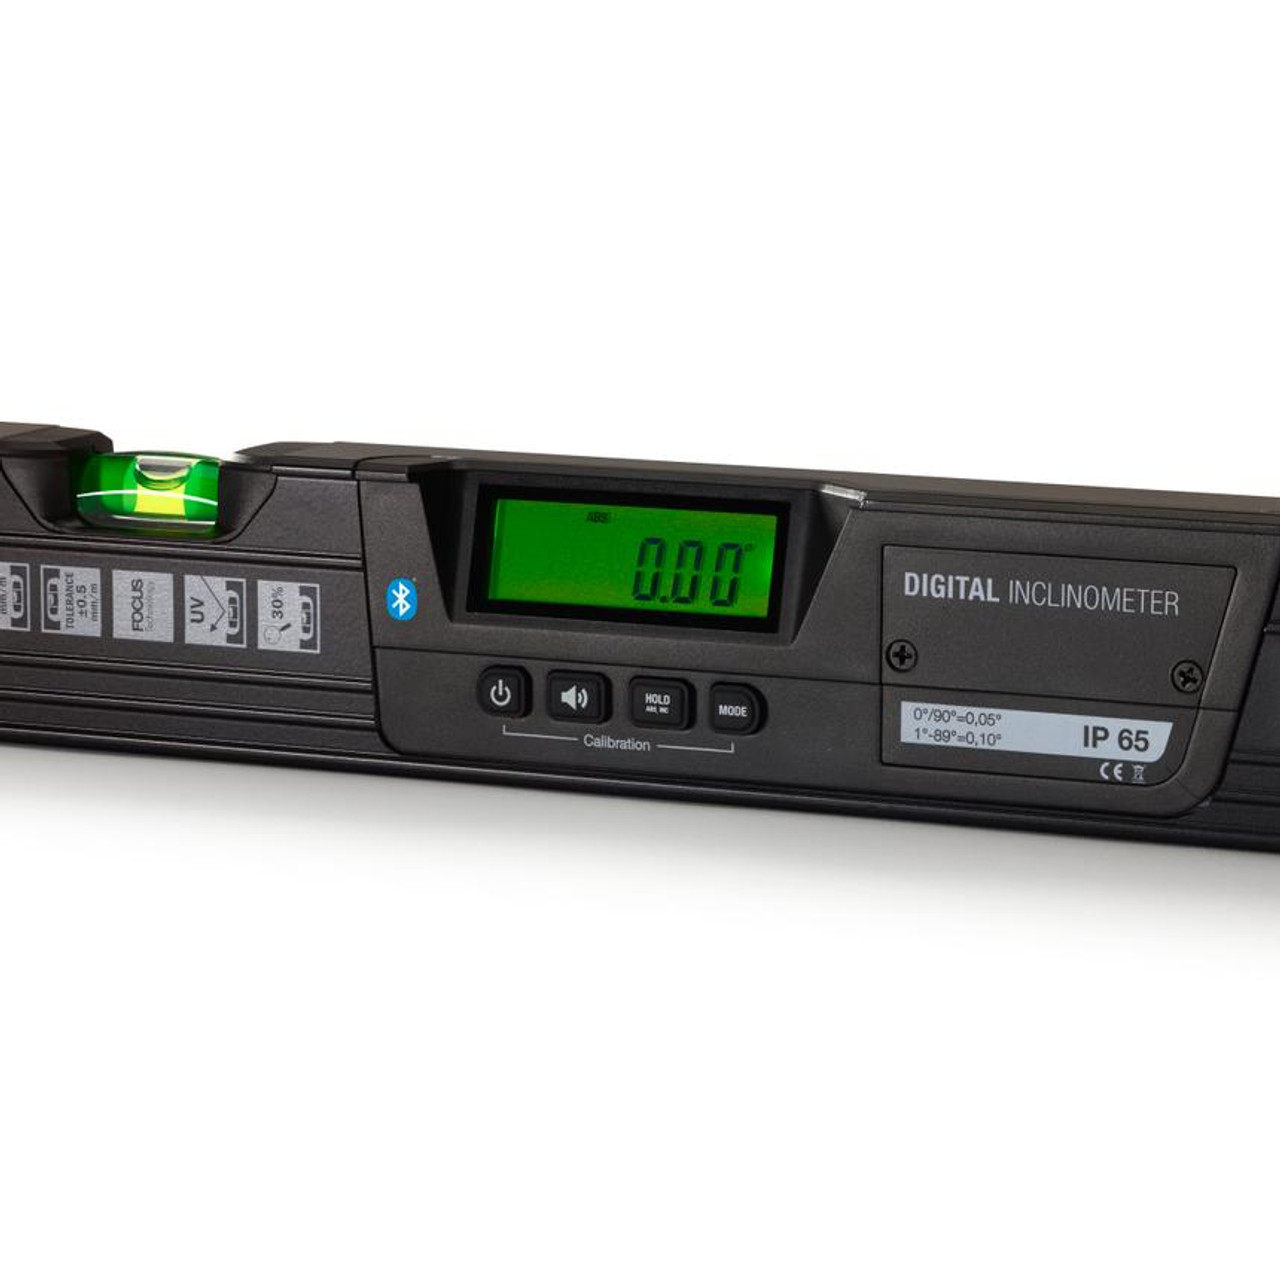 Spirit Level D60 from HULTAFORS for Carpenters that have 60cm Digital Spirit Level available in Australia and New Zealand